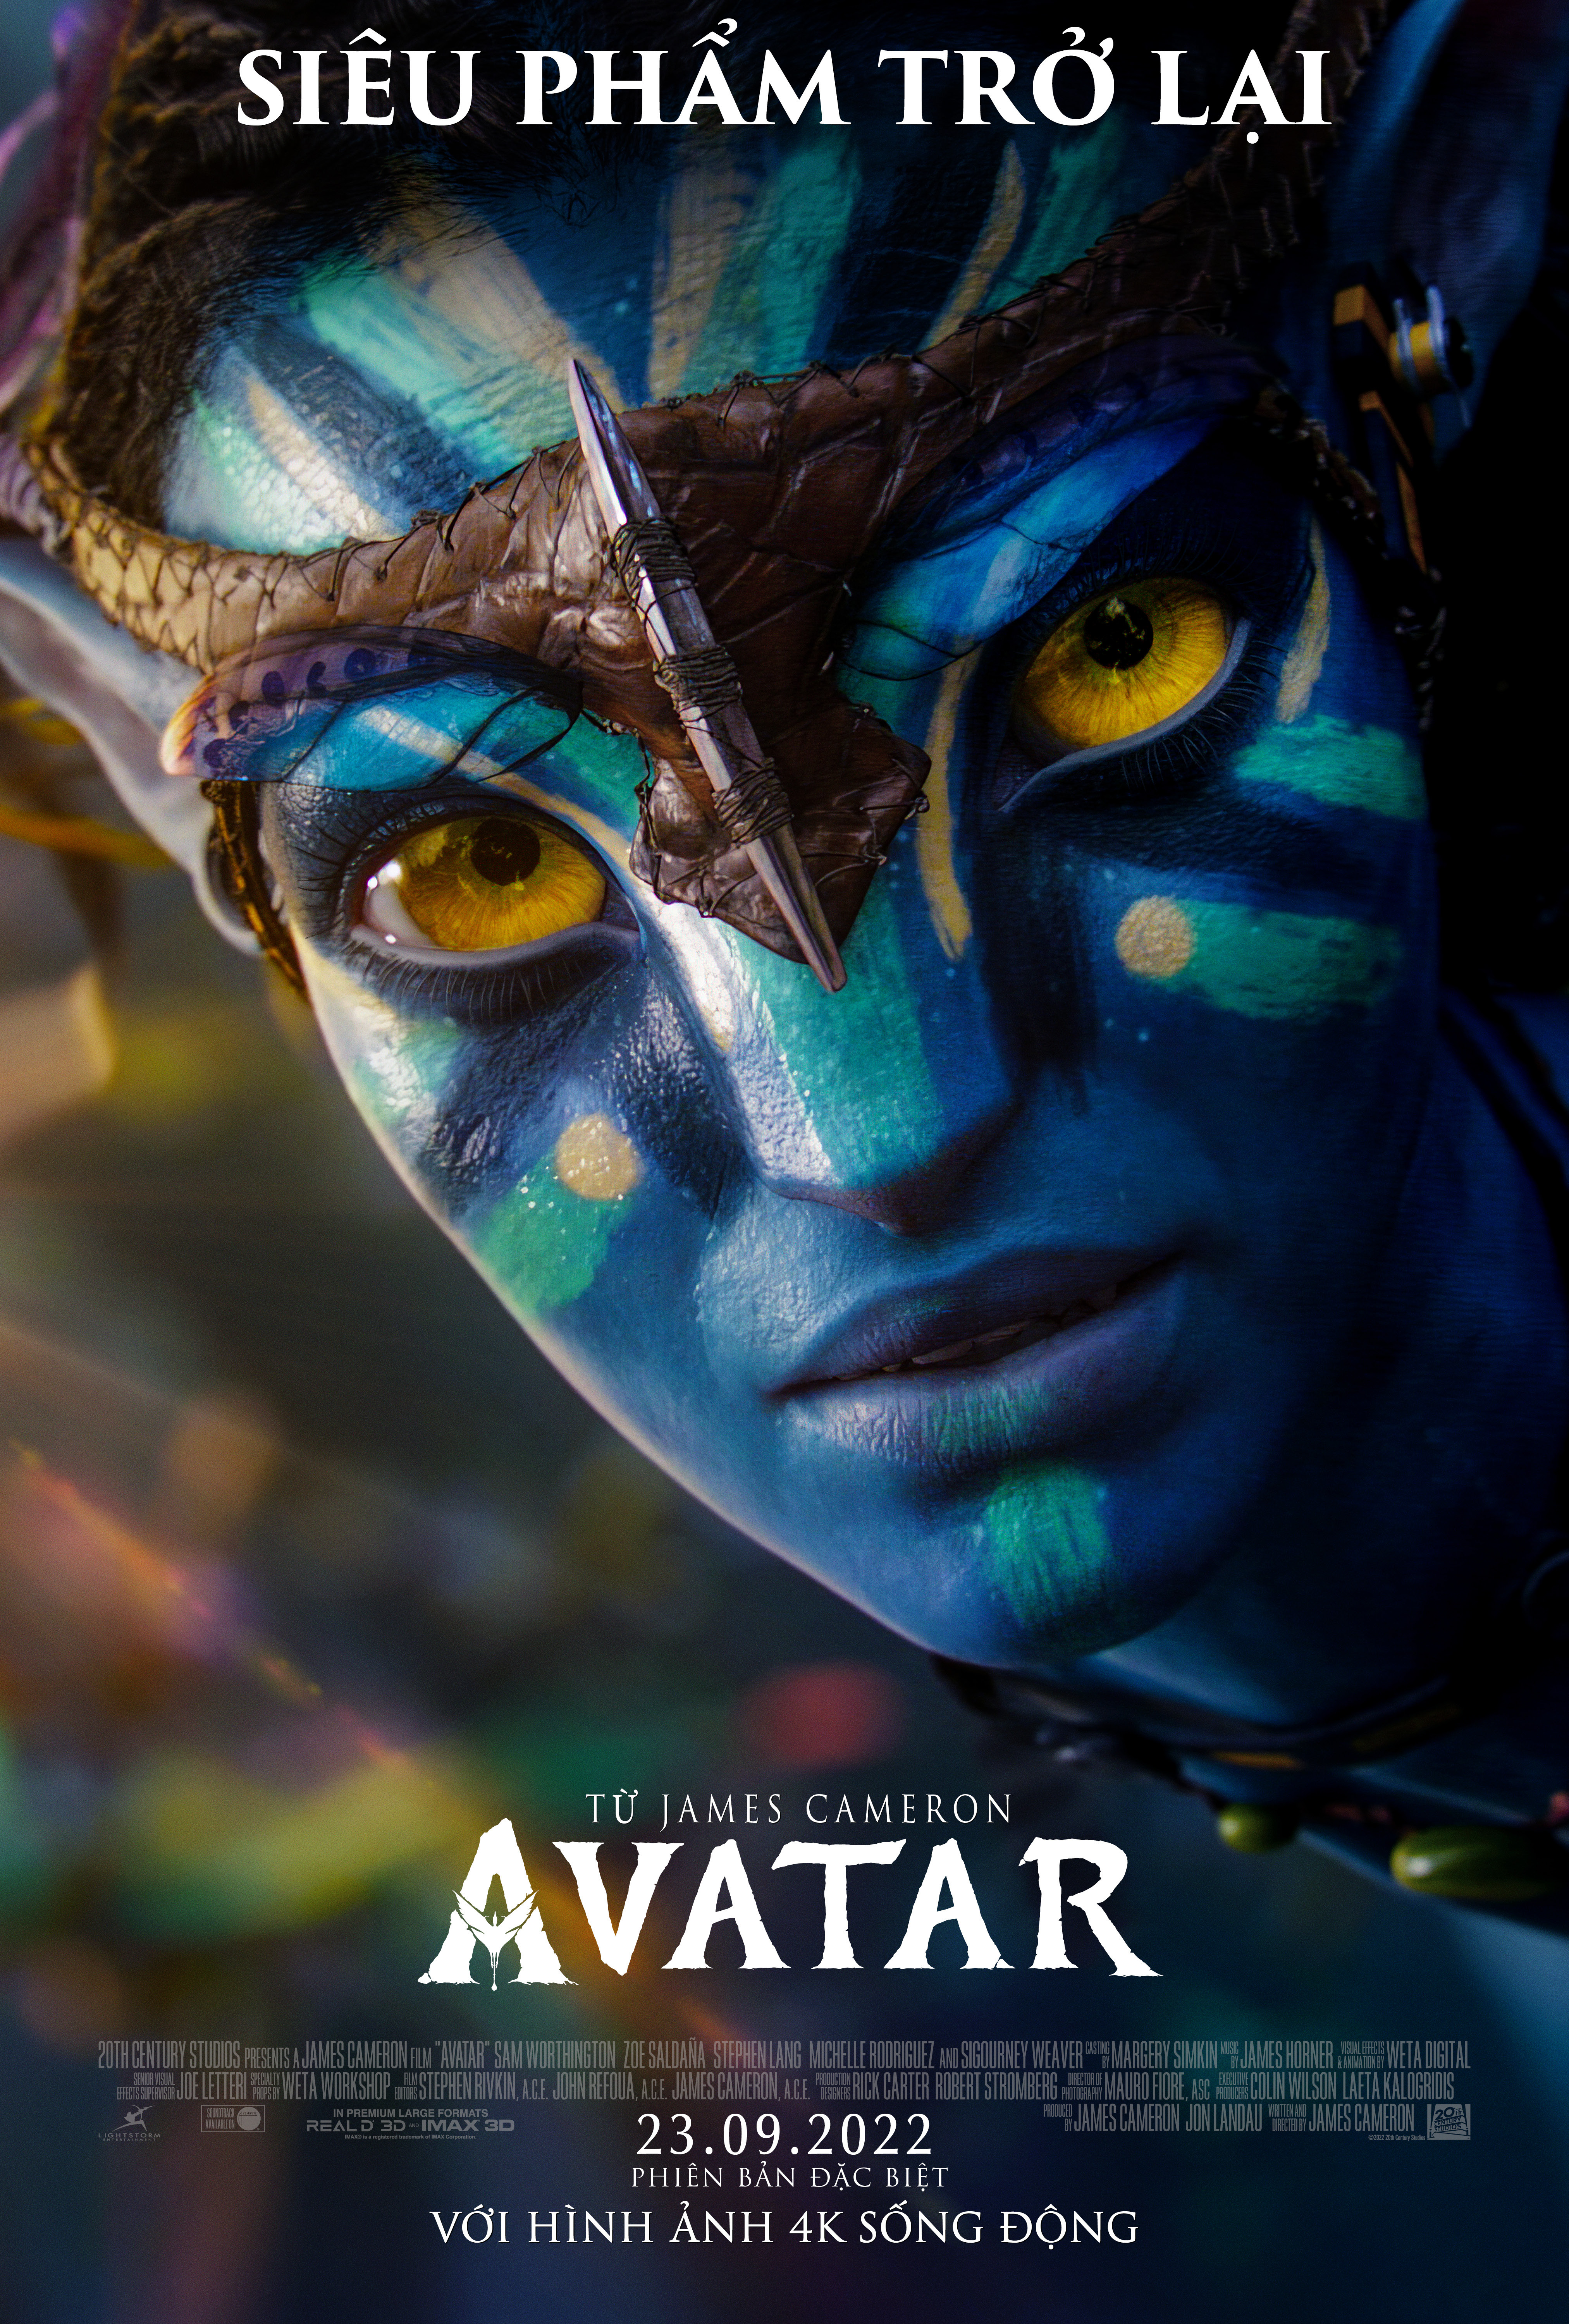 New release dates for Avatar 3 Avatar 4 and Avatar 5 announced